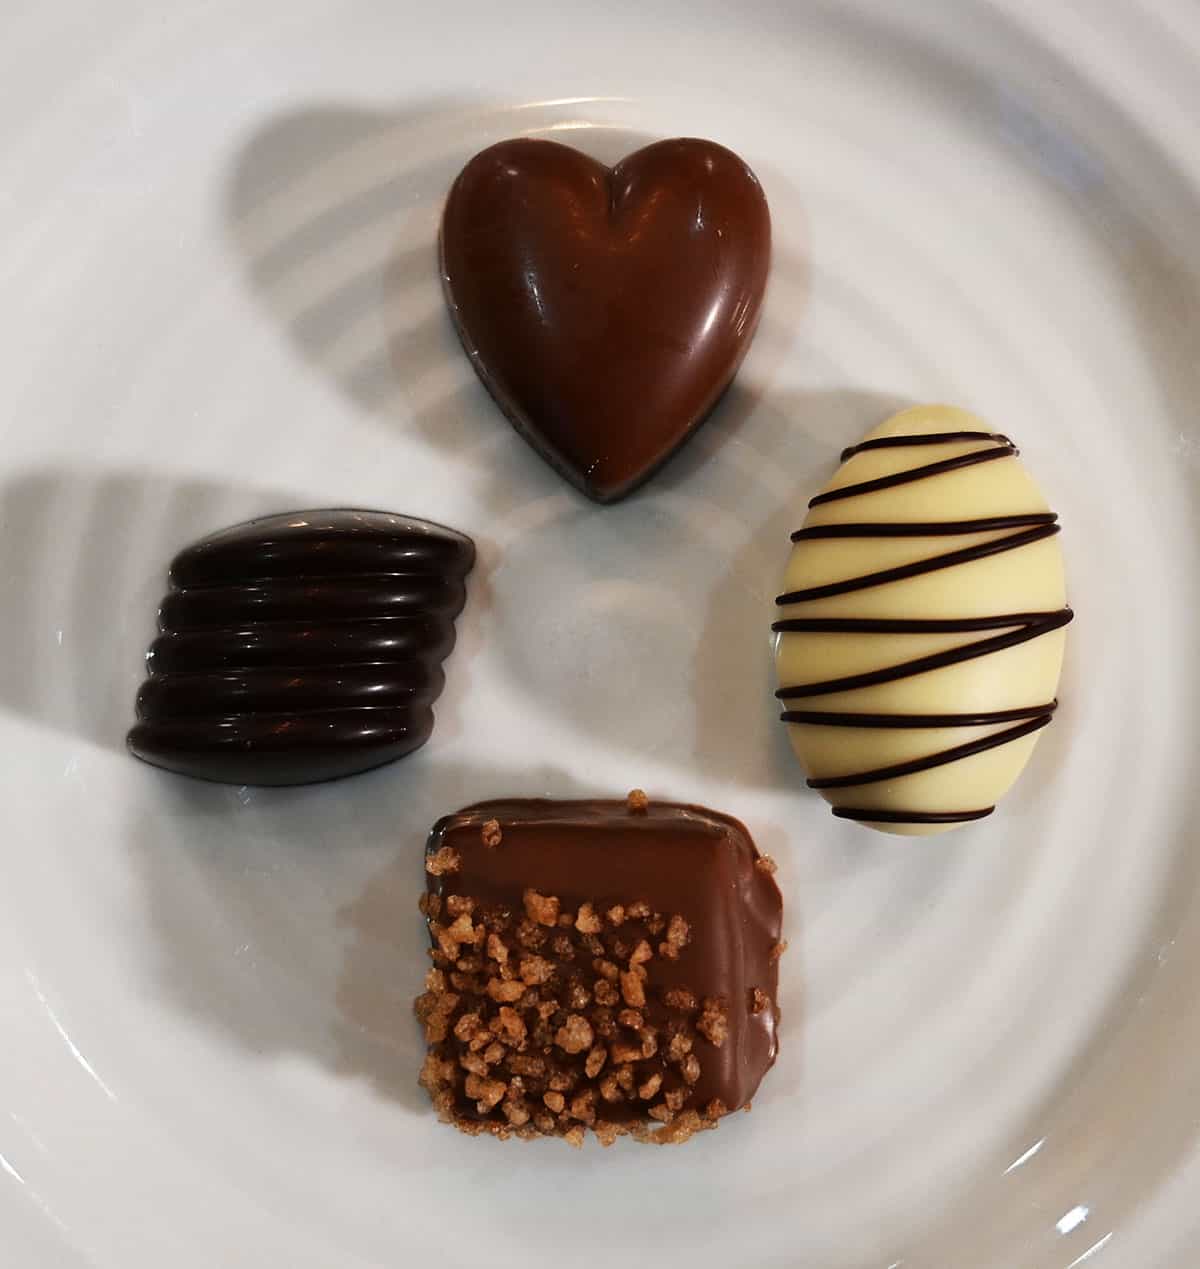 Image of the four different chocolates served on a white plate so you can see each flavor up close.